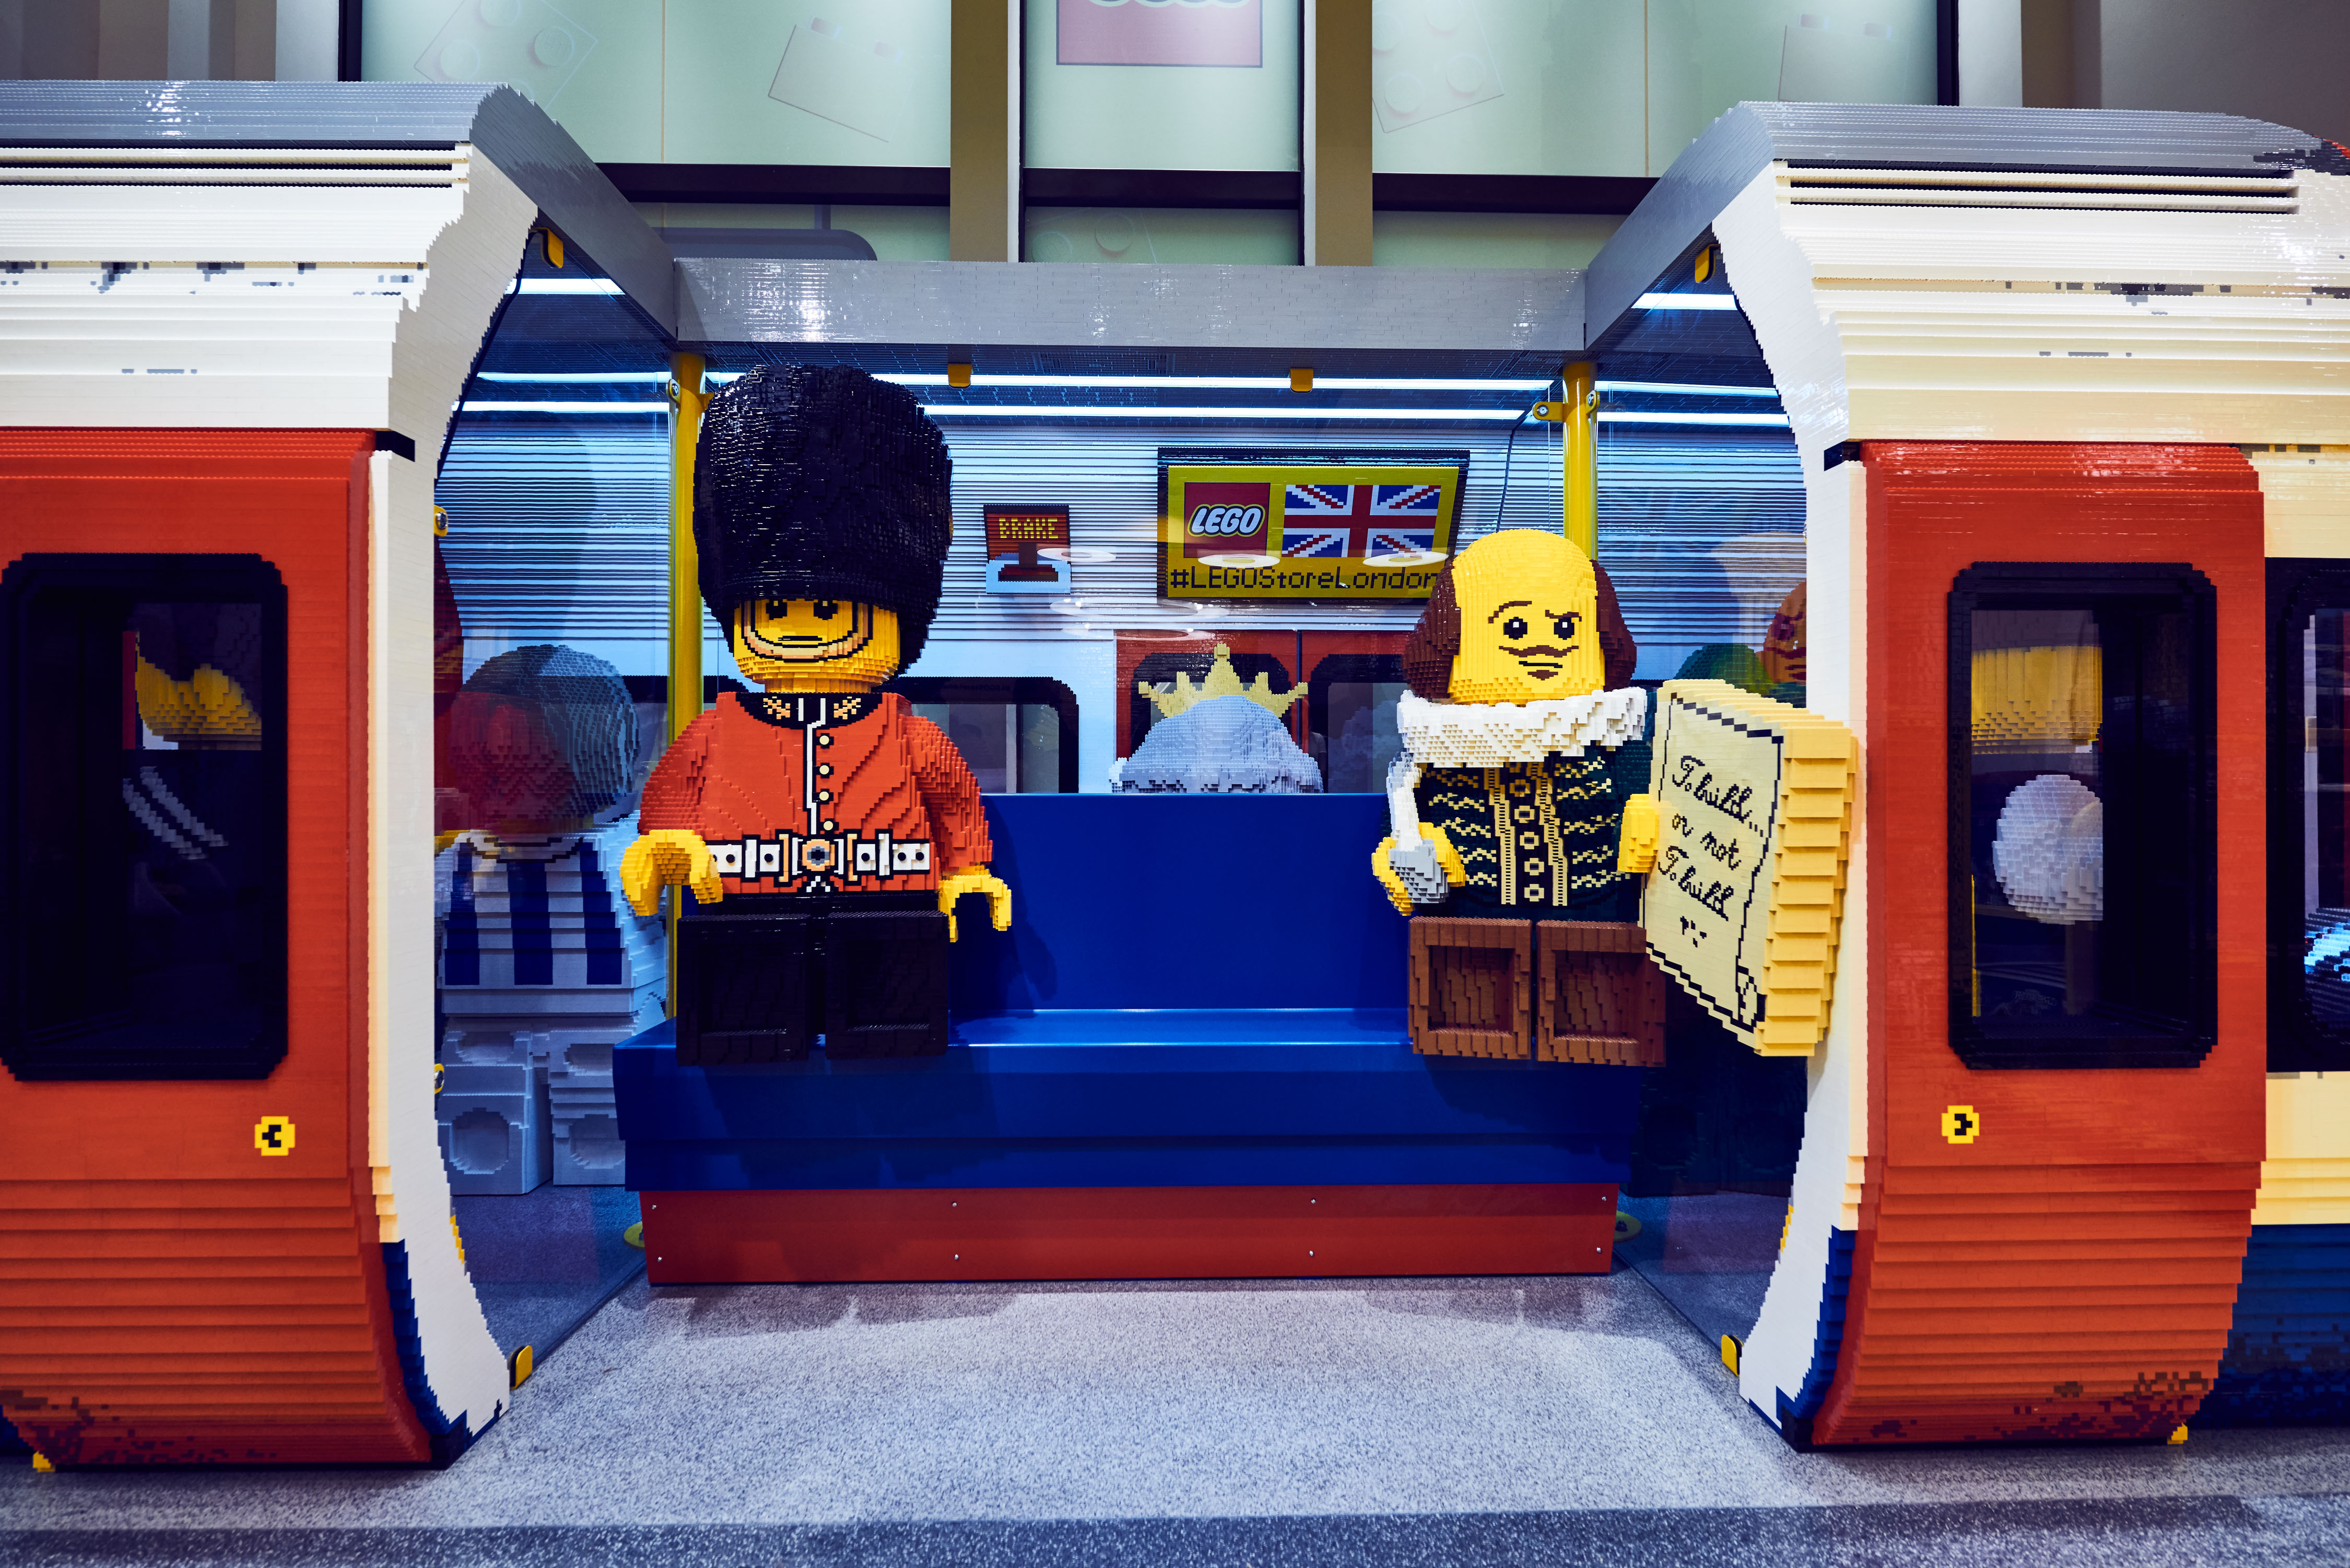 Through a partnership with Transport for London, Lego has created a life-sized London Underground train car. The train car is made up of 637,903 bricks and took 3,399 hours to build. (Lego)